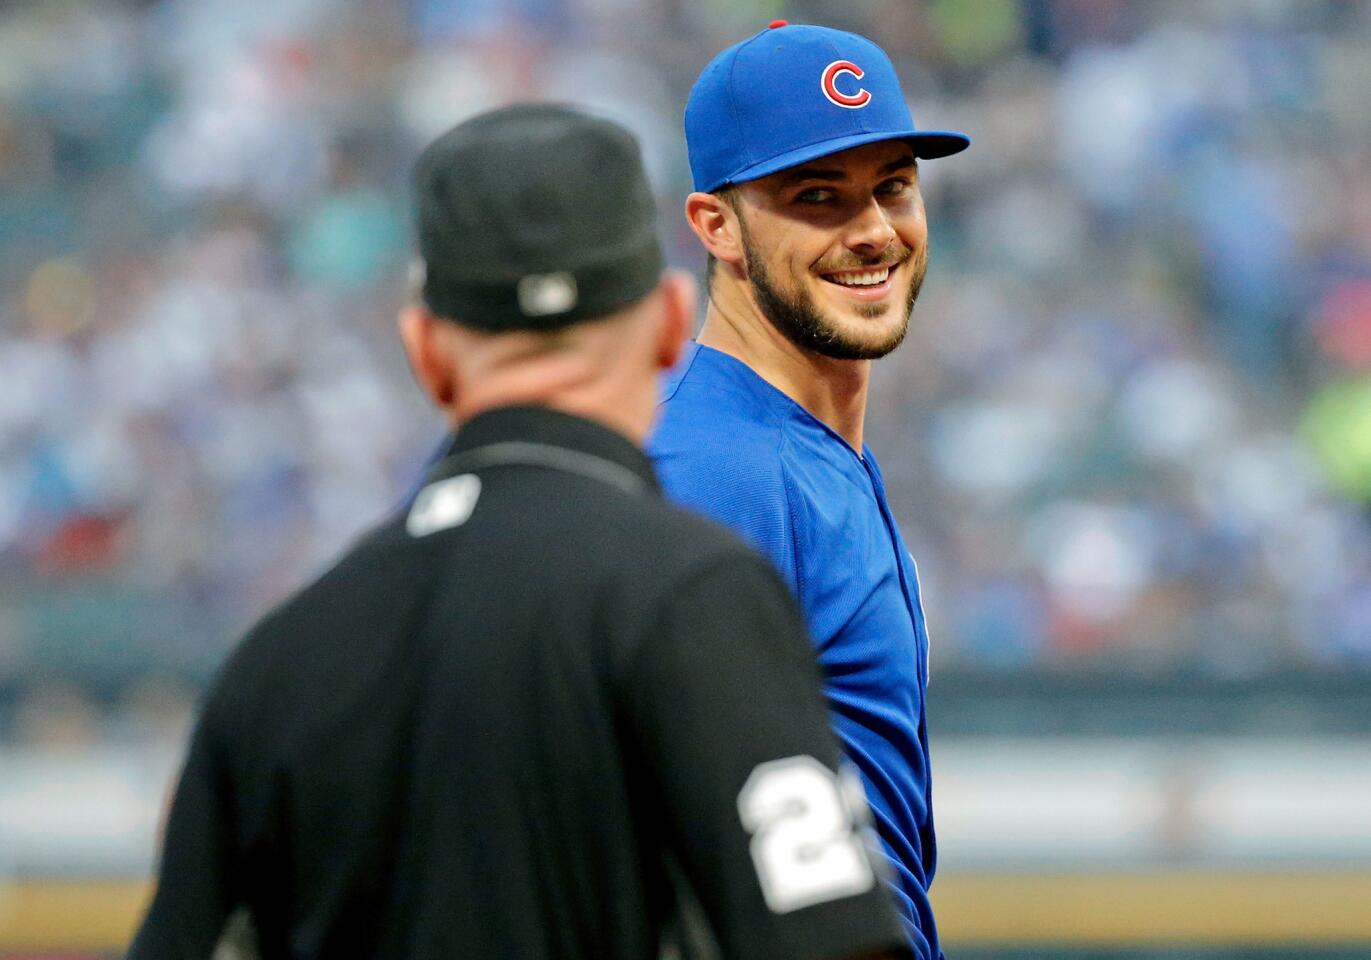 Kris Bryant smiles as he talks with third base umpire Lance Barksdale before the game against the White Sox at Guaranteed Rate Field on July 26, 2017.